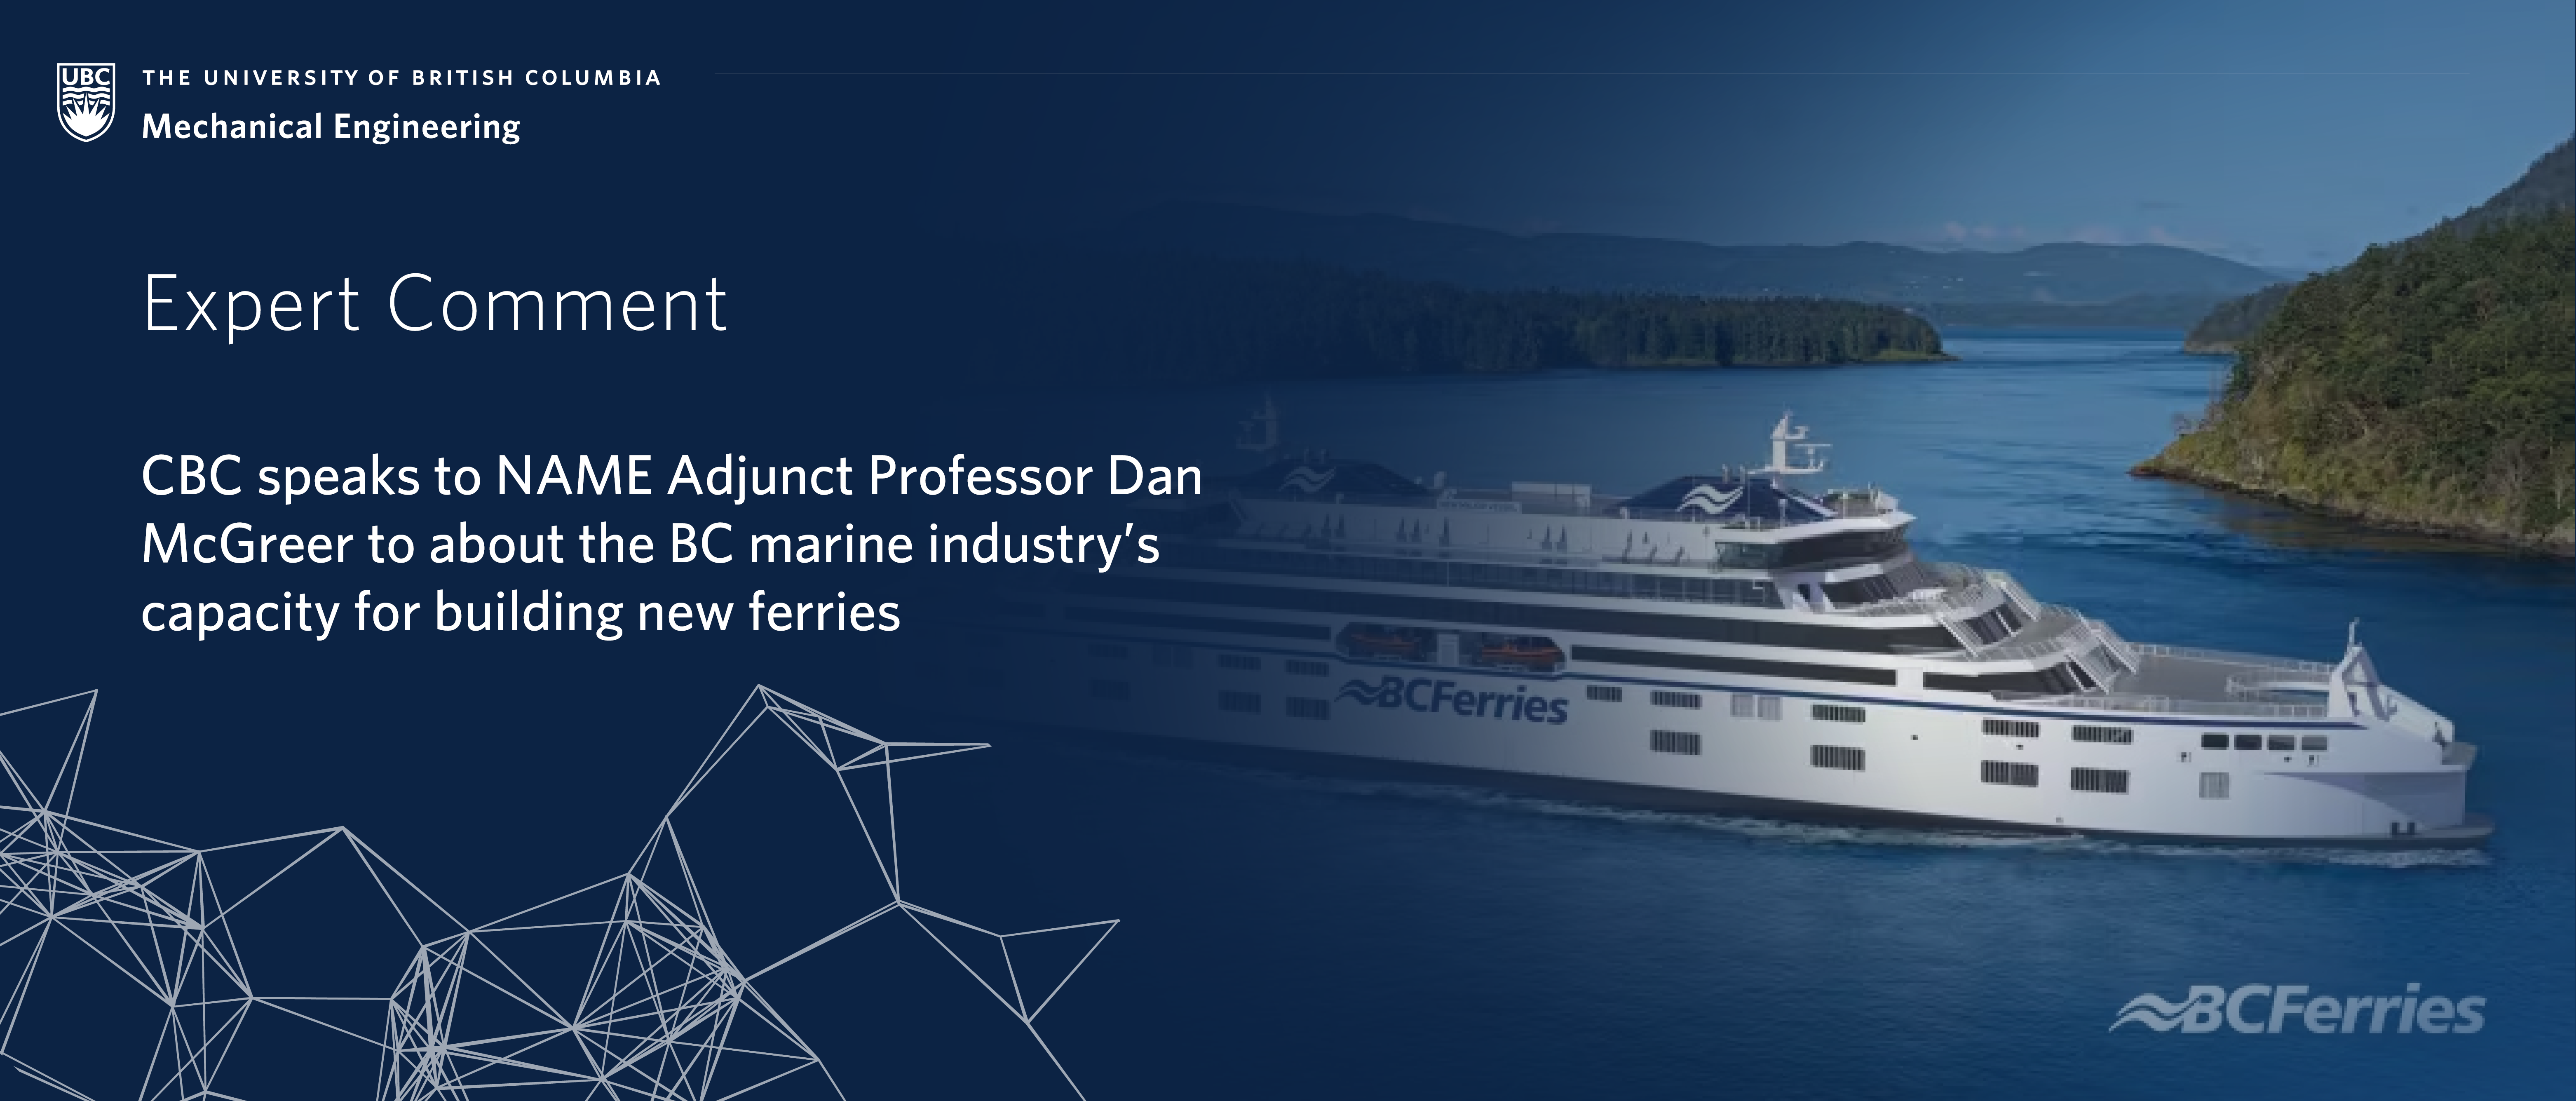 BC Ferries is looking to build new vessels - should the work stay at home or go to global providers?